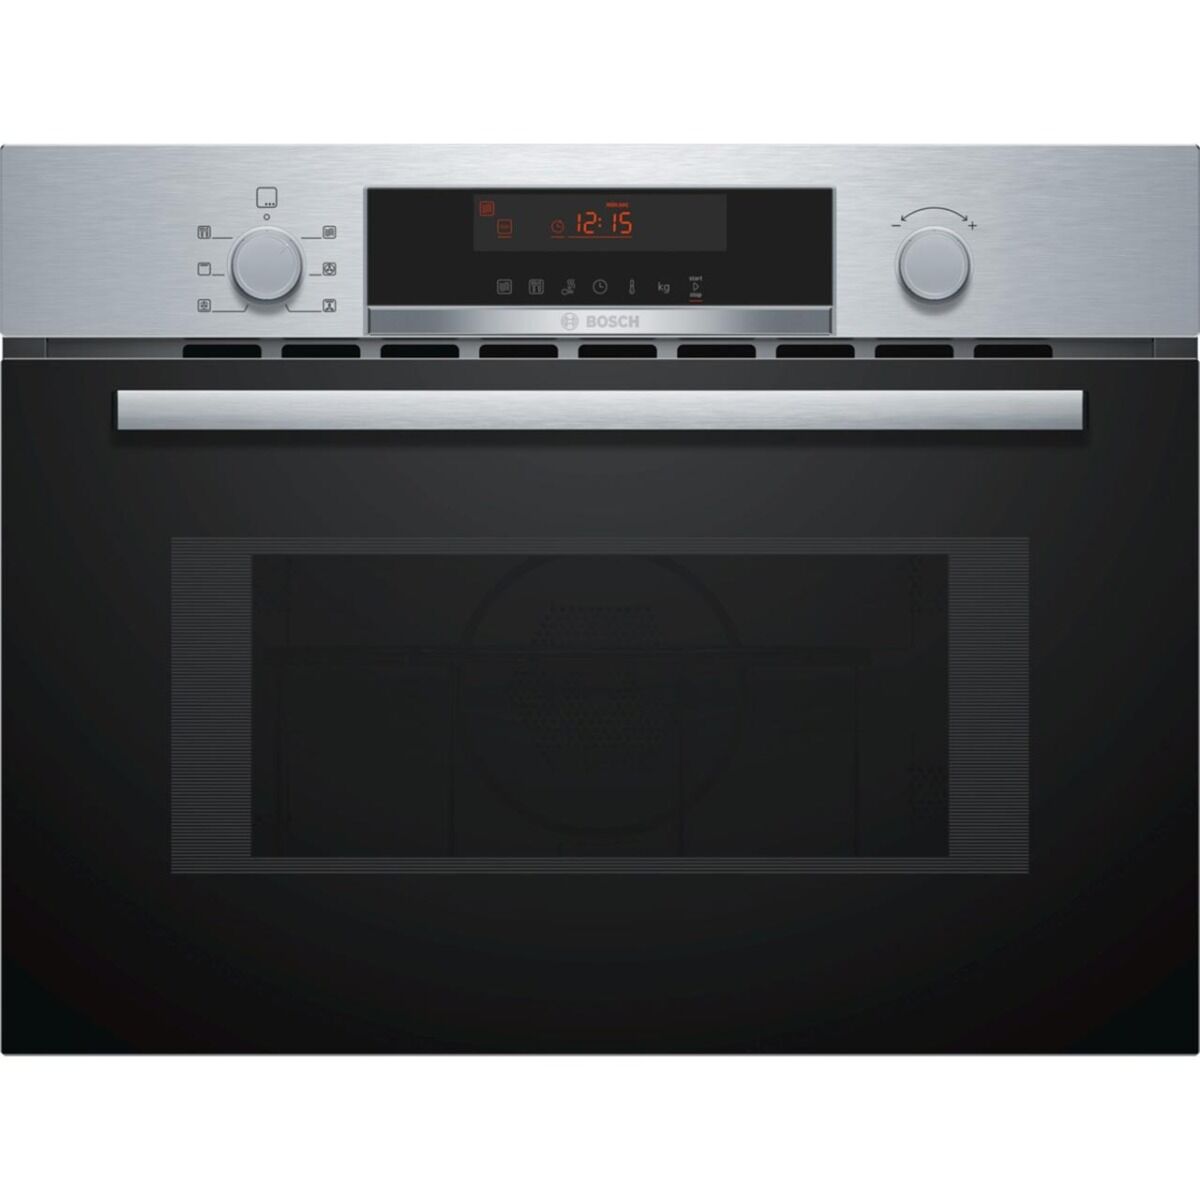 Bosch CMA583MS0B Stainless Steel Built In Combination Microwave Oven - Black / Stainless